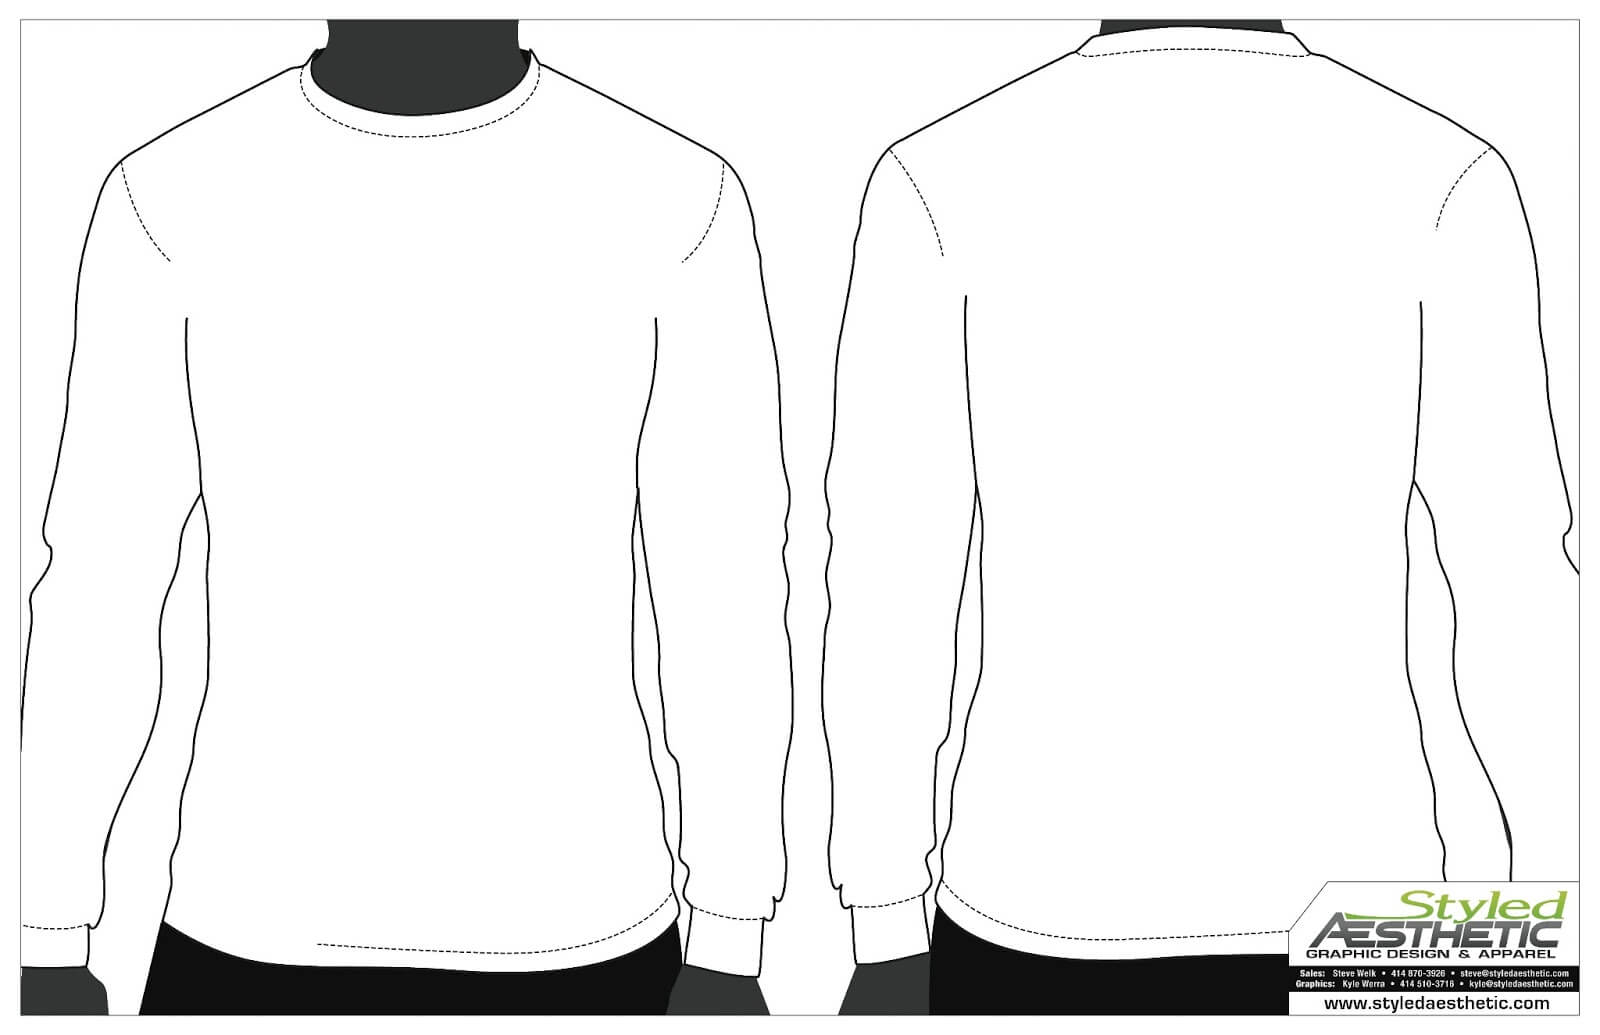 12 Long Sleeve Blank T Shirt Template Psd Images – Long With Blank T Shirt Design Template Psd